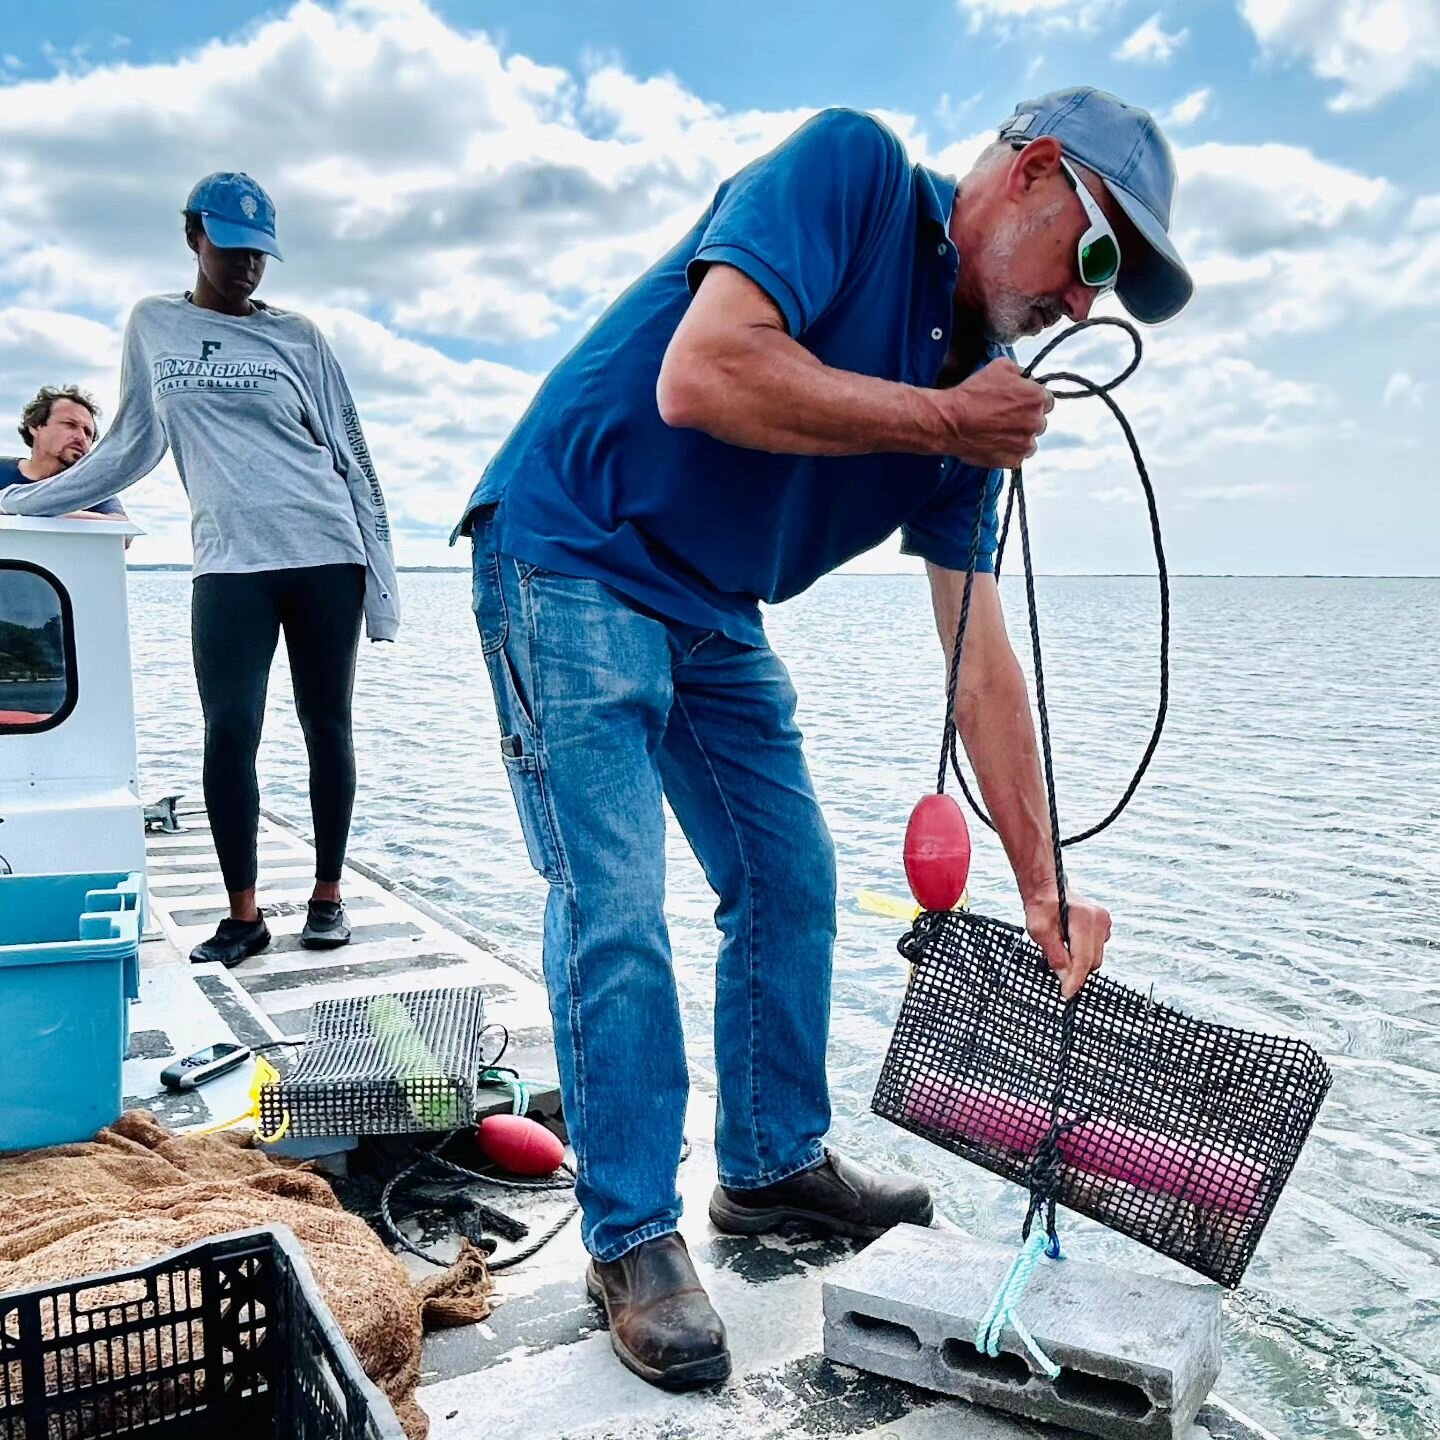 Last Thursday&nbsp;the FoBB team went out on Bellport Bay with Gregg Rivara, Aquaculture Specialist/ Cornell Cooperative Extension of Suffolk County (CCESC).

Gregg built and&nbsp;deployed 10 Oyster Spat Collectors into Bellport Bay&rsquo;s&nbsp;Town